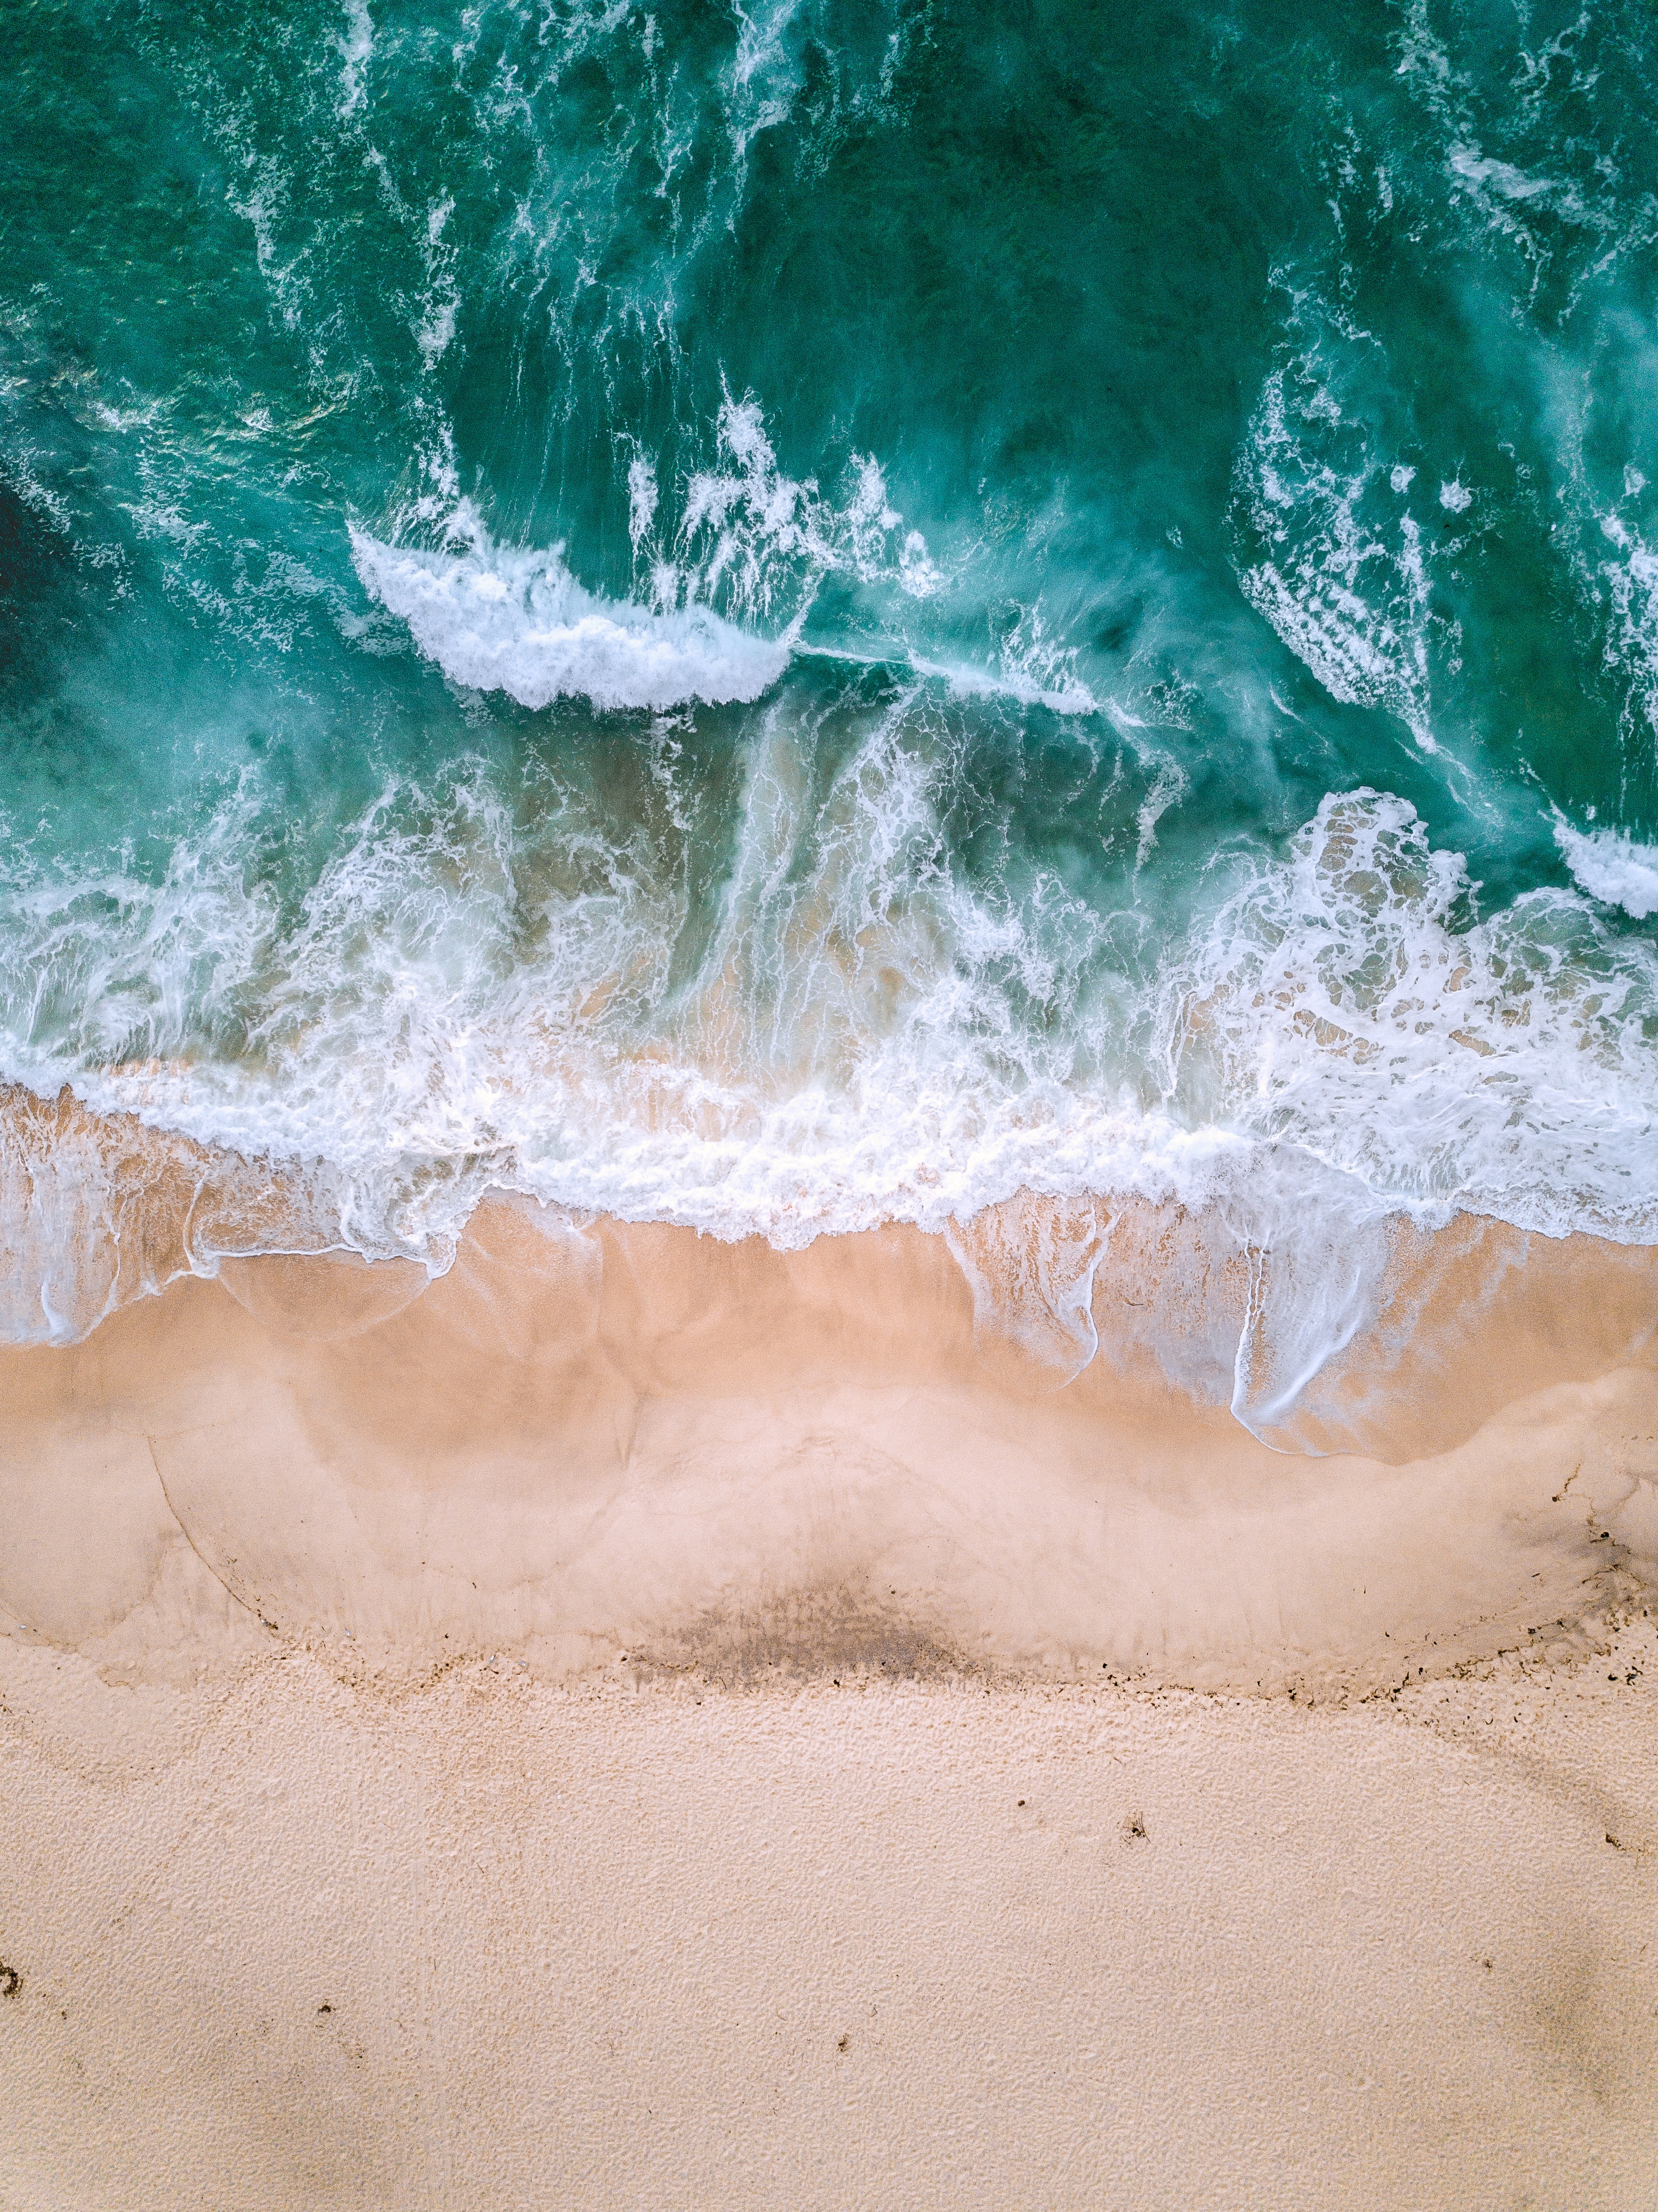 view from above, ocean, sand, nature, waves, foam, surf